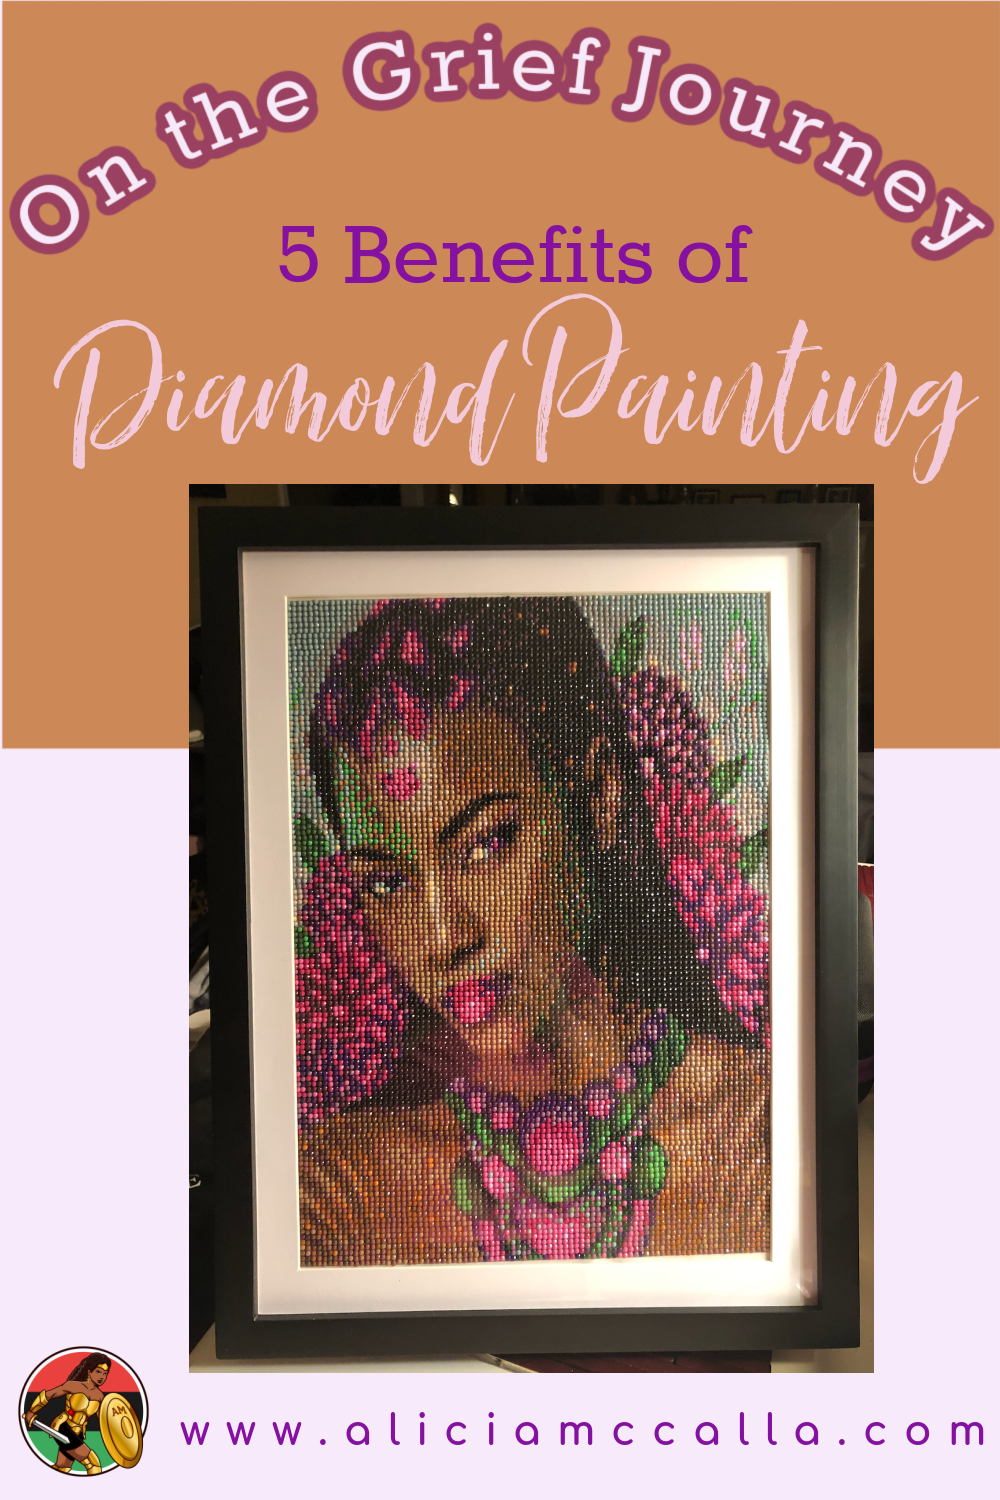 On the Grief Recovery Journey: Five Benefits of Diamond Painting to Navigate Grief Brain